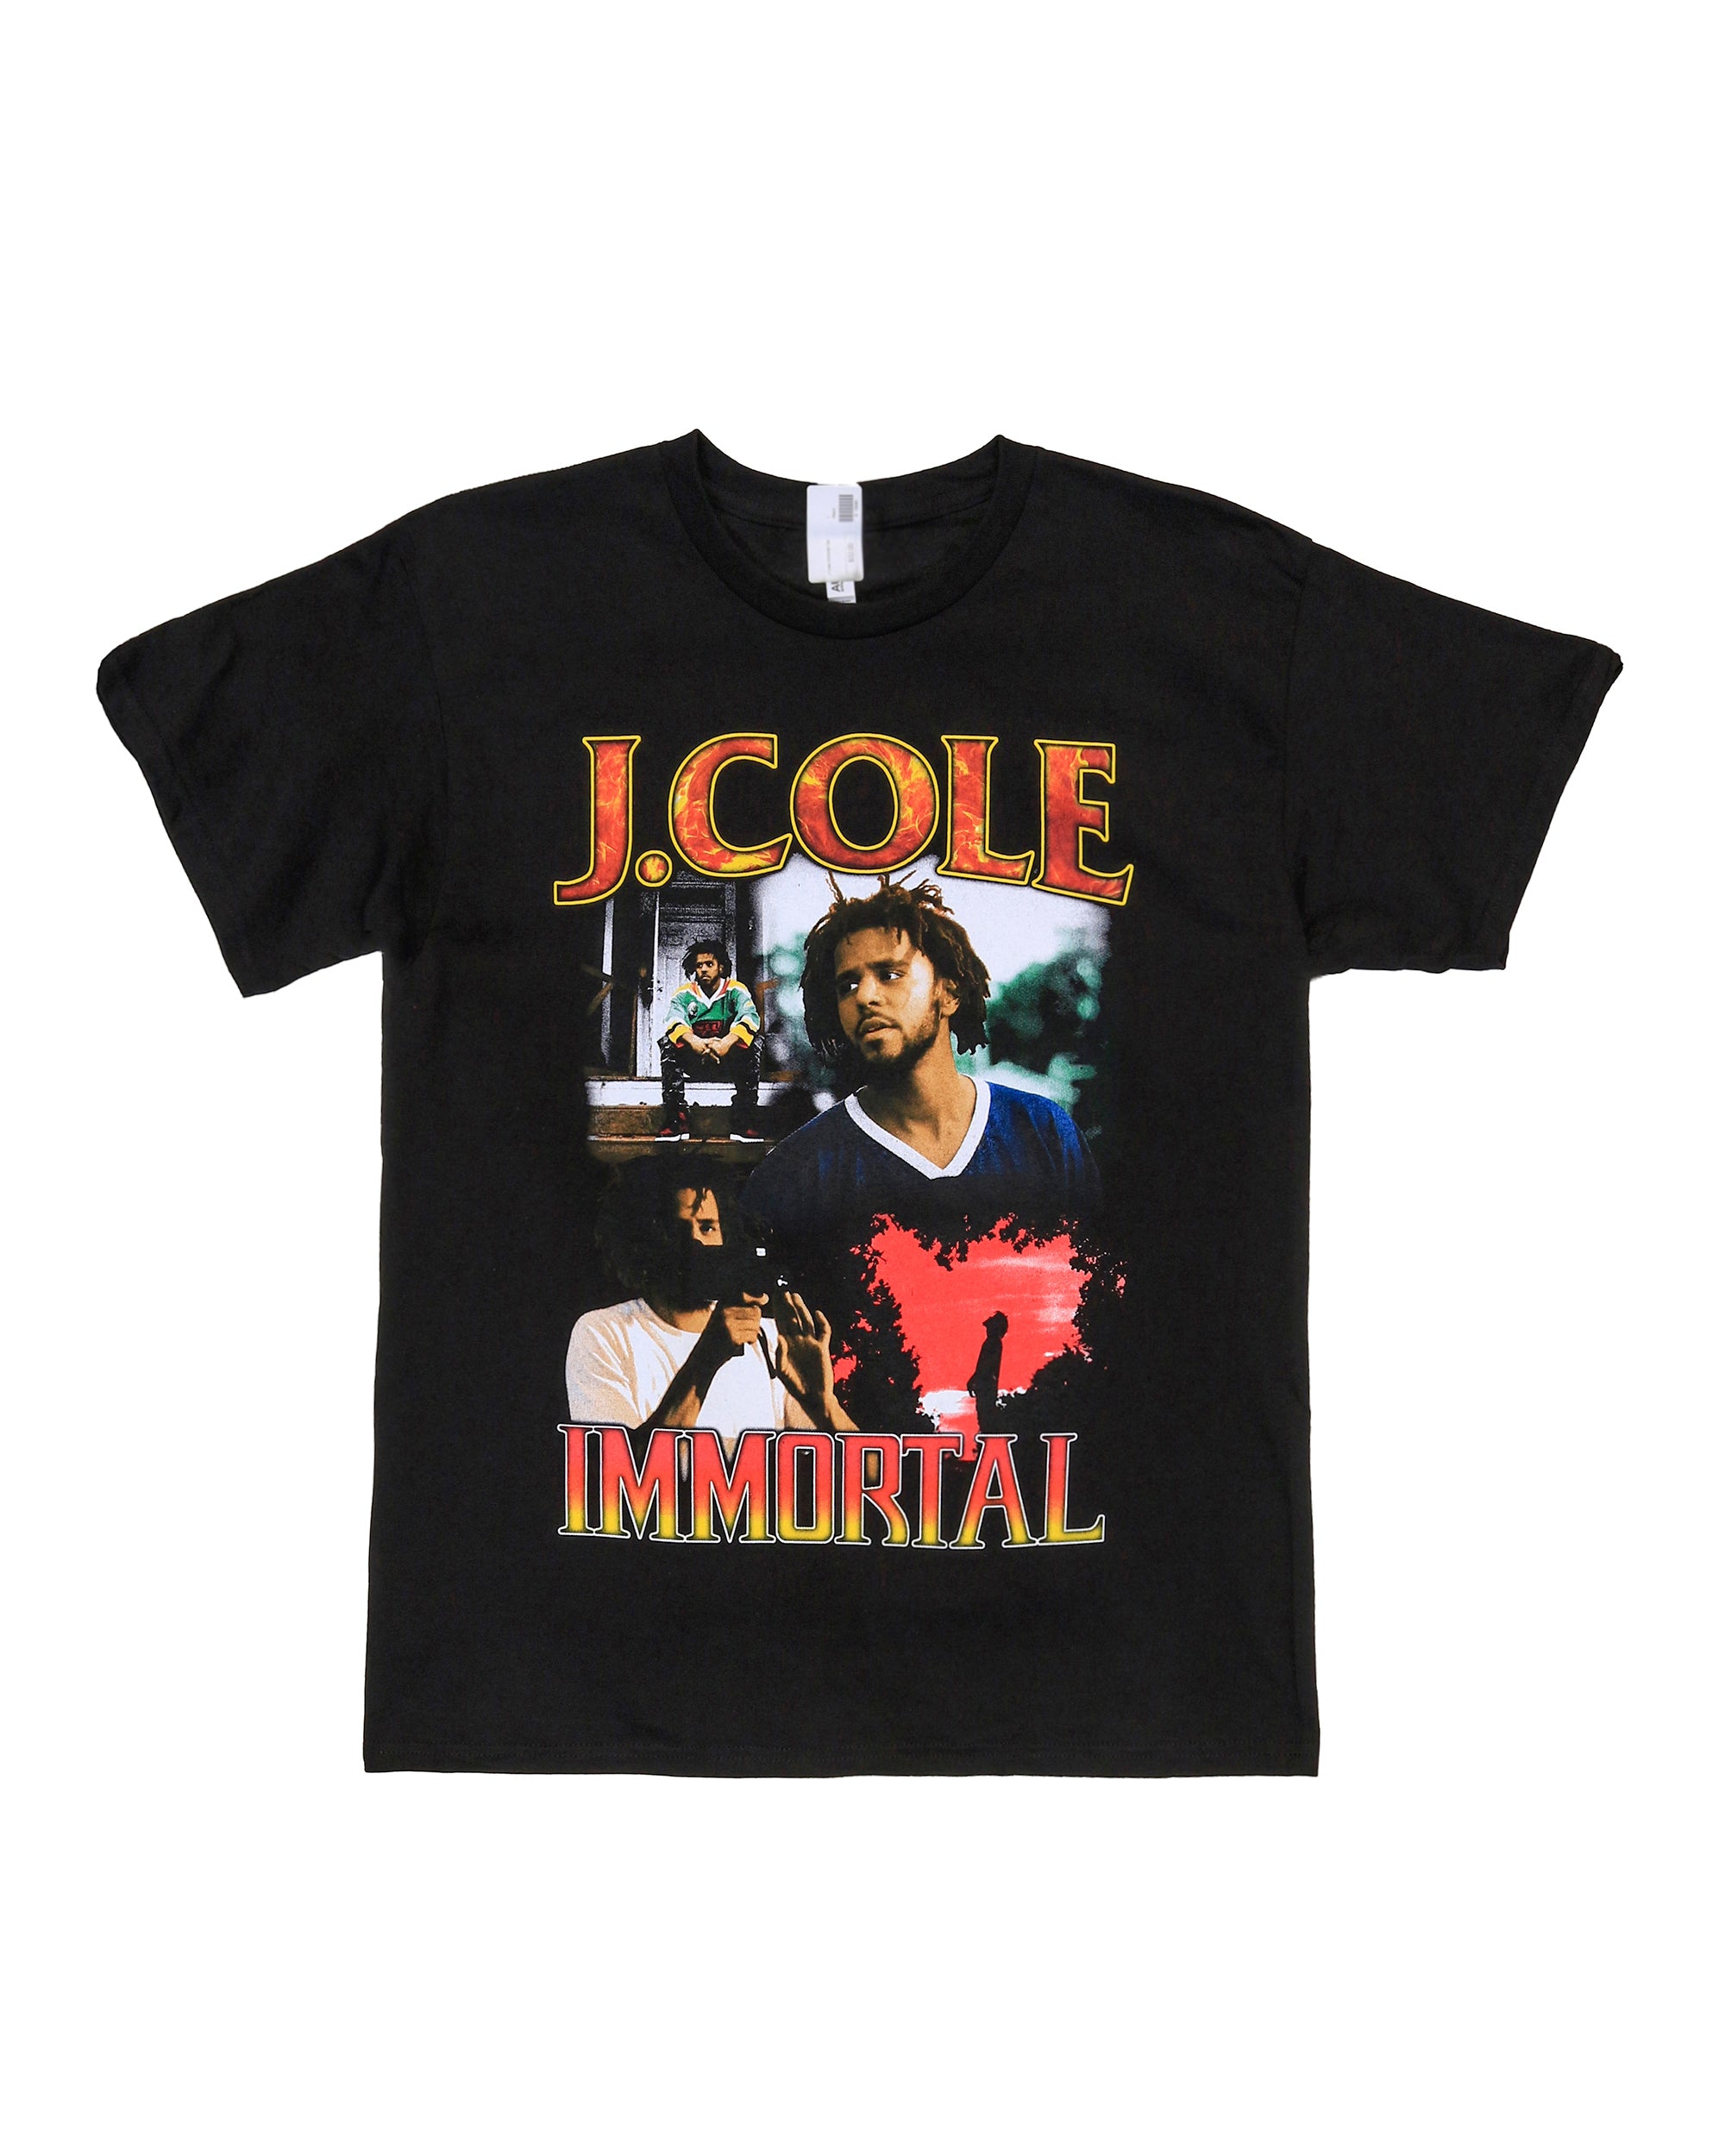 J. Cole Immortal Vintage Style Graphic Band Tee T Shirt